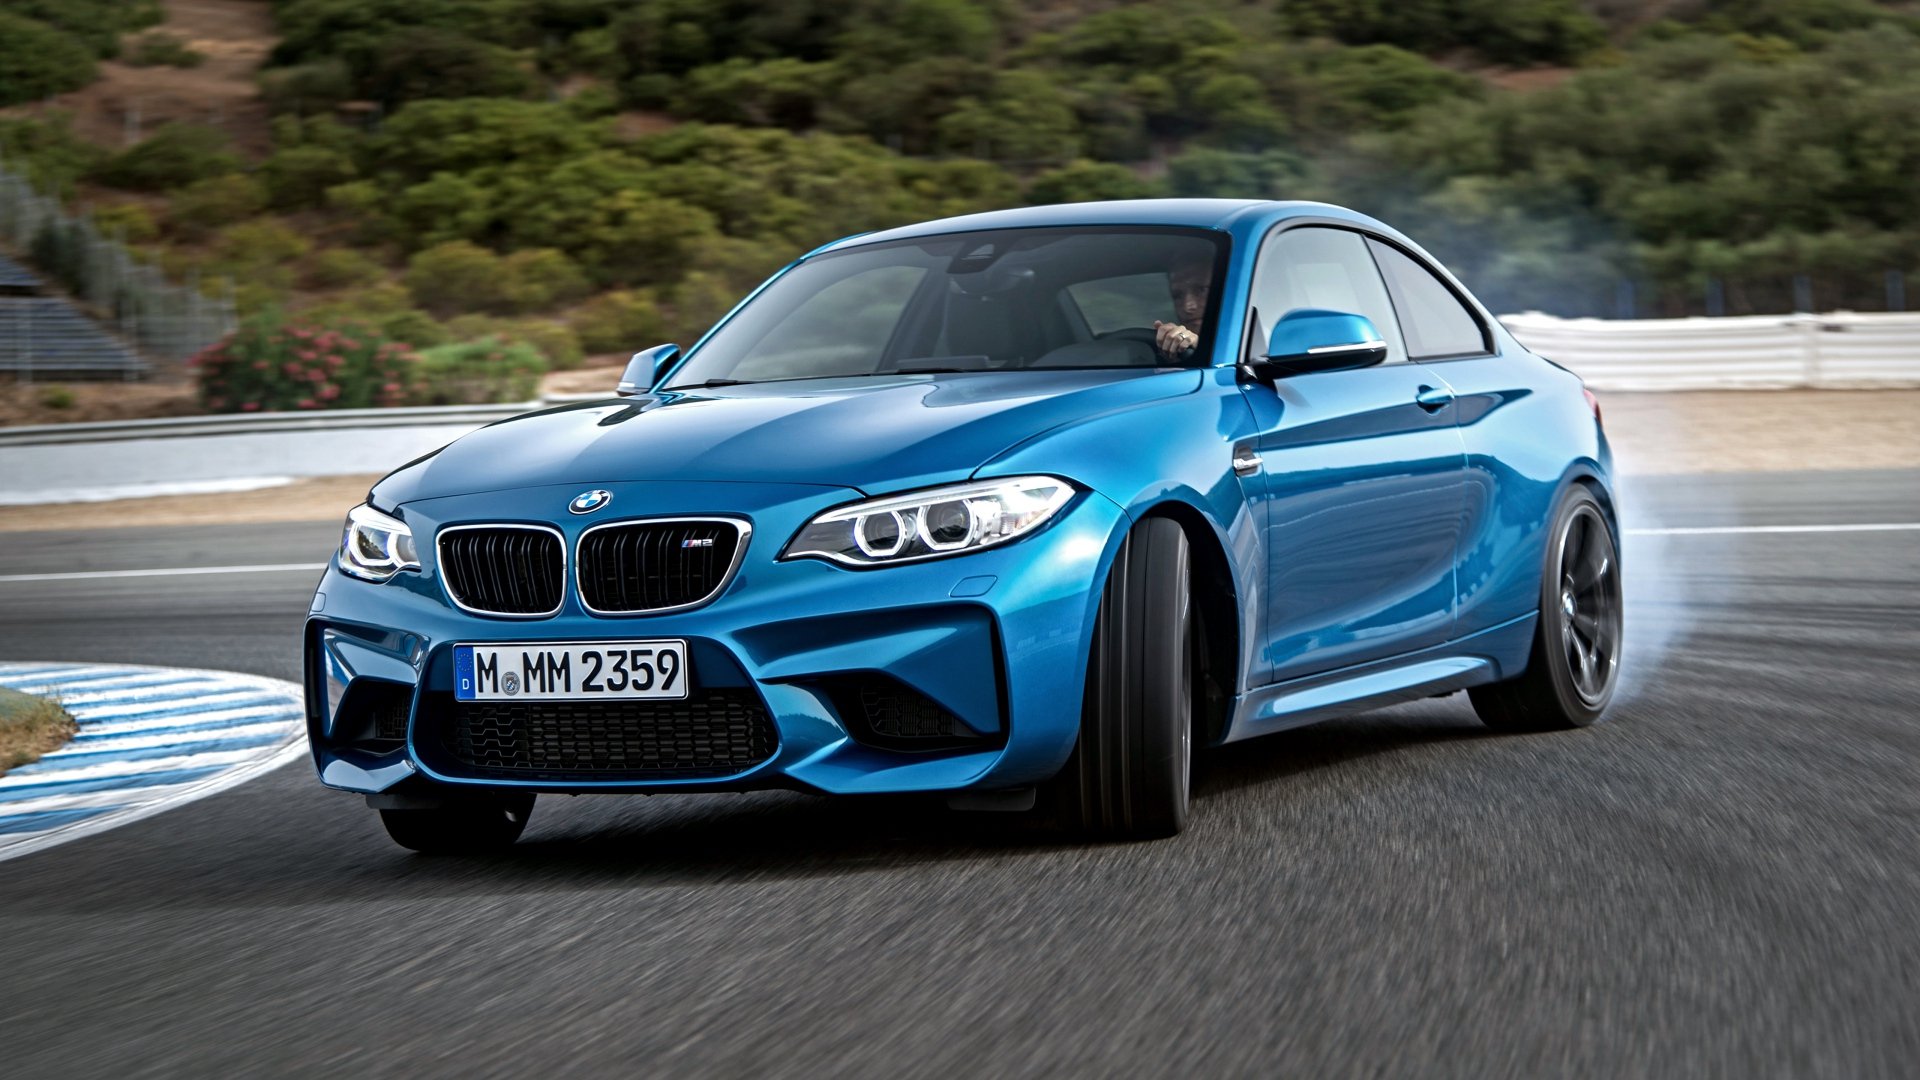  Bmw M2 F87 Blue Side view Wallpaper Background Full HD 1080p